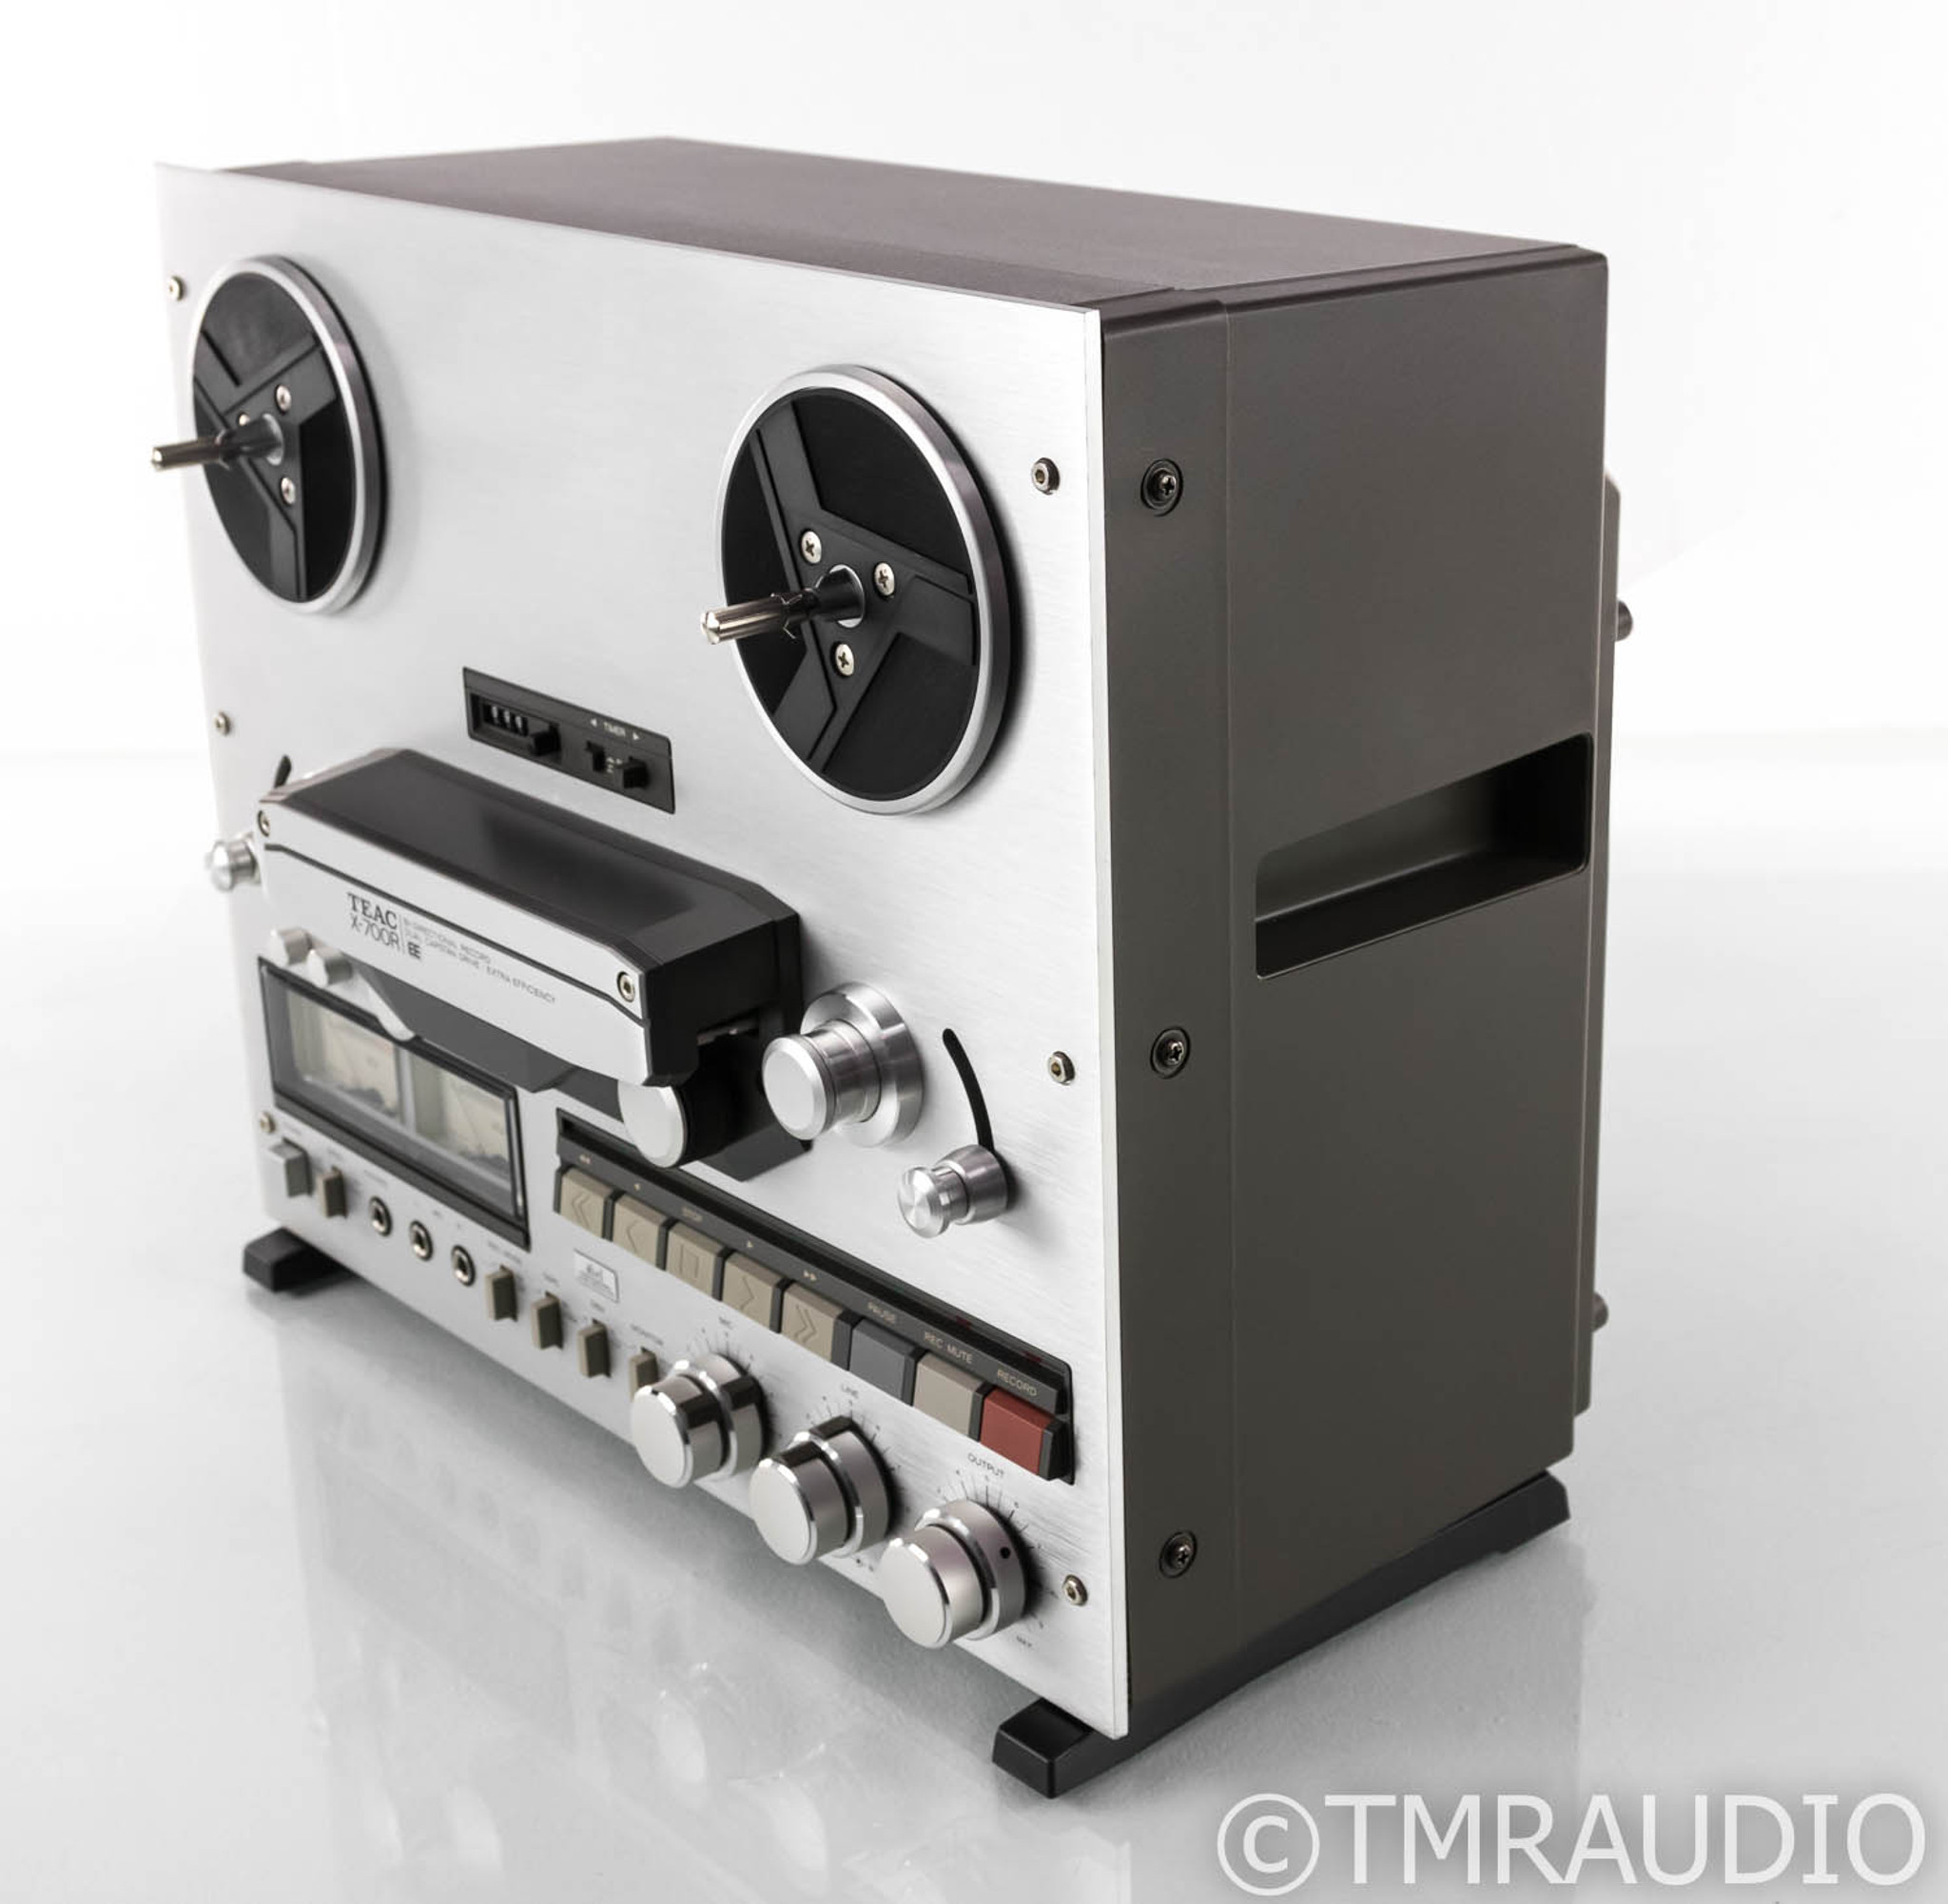 Teac X-700R Vintage Reel To Reel Tape Player; 2 Channel 1/4 Track; Serviced